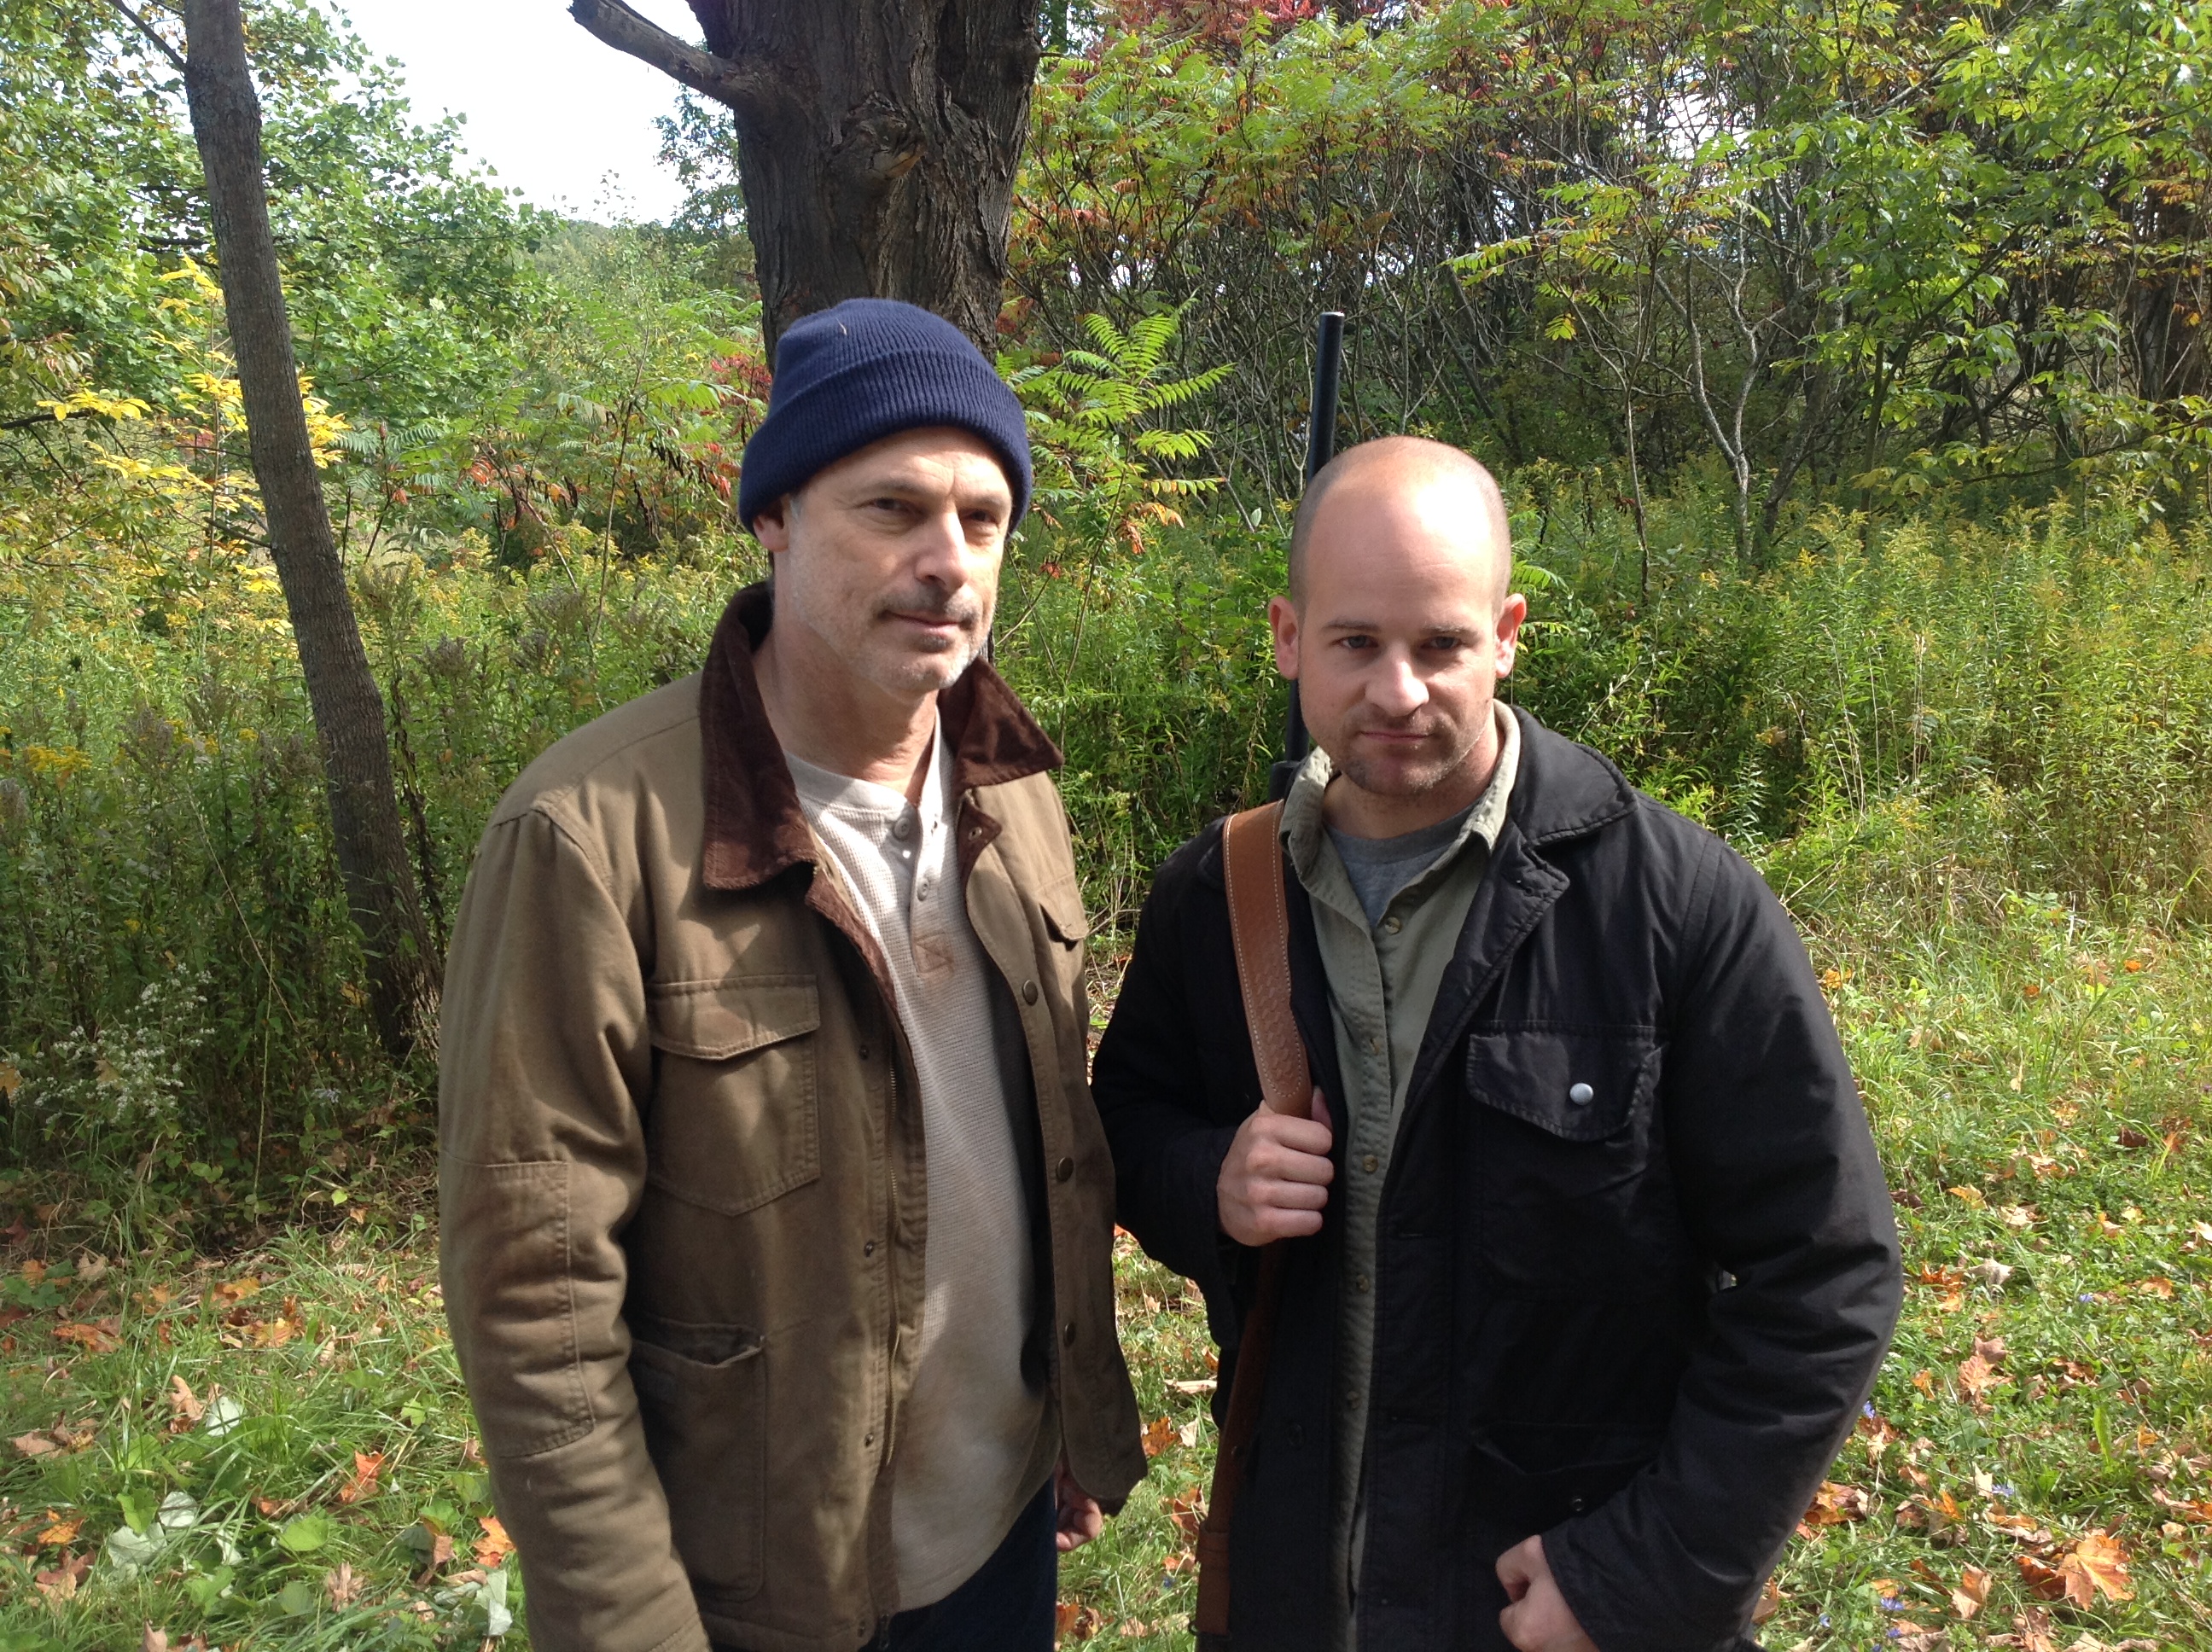 Nick Guest (left) & James Quinn (right)on set of the upcoming feature film 